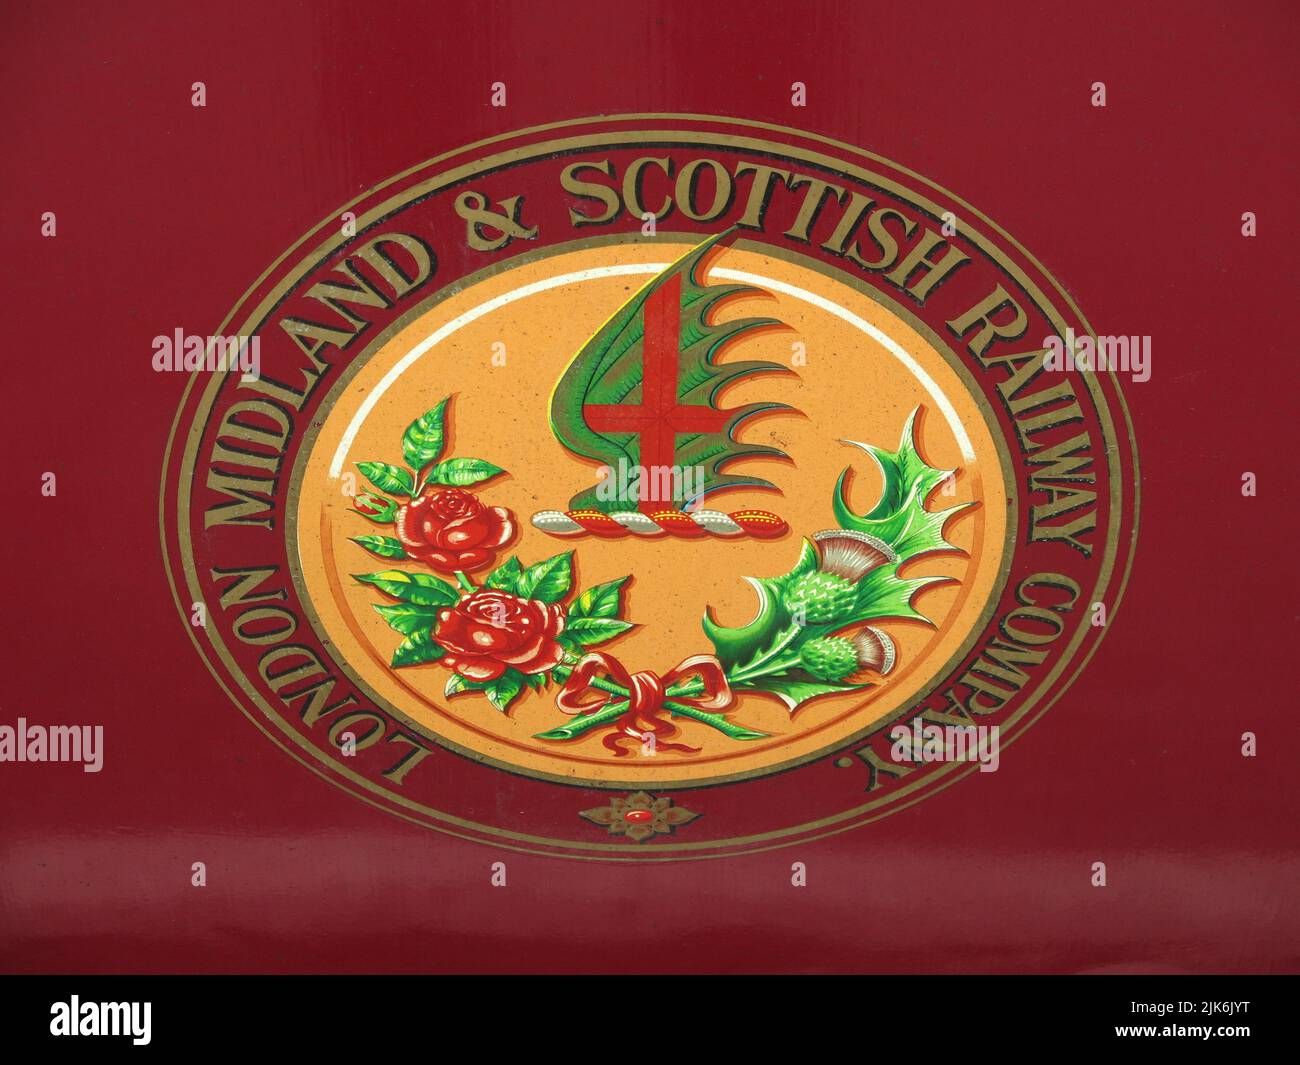 Close-up of the red livery and logo of the London Midland & Scottish Railway Company on a train carriage on the Strathspey Heritage Steam Railway. Stock Photo